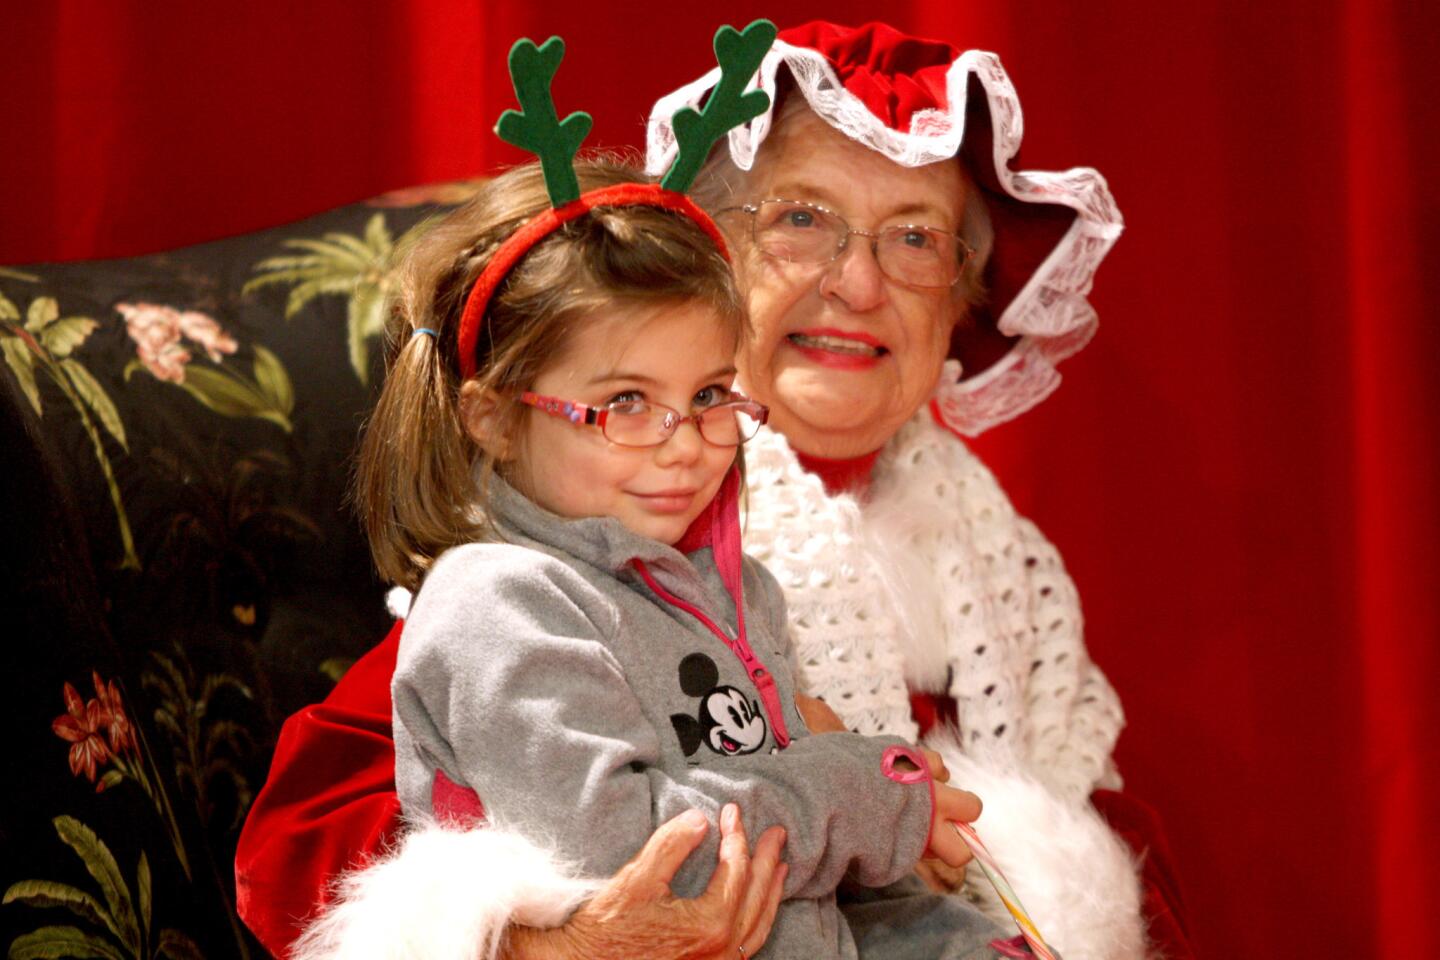 Allison Roberts, 4 of La Cañada Flintridge had a chance to meet with Mrs. Claus during the 21st Festival in Lights at Memorial Park in La Cañada Flintridge on Friday, Dec. 4, 2015.